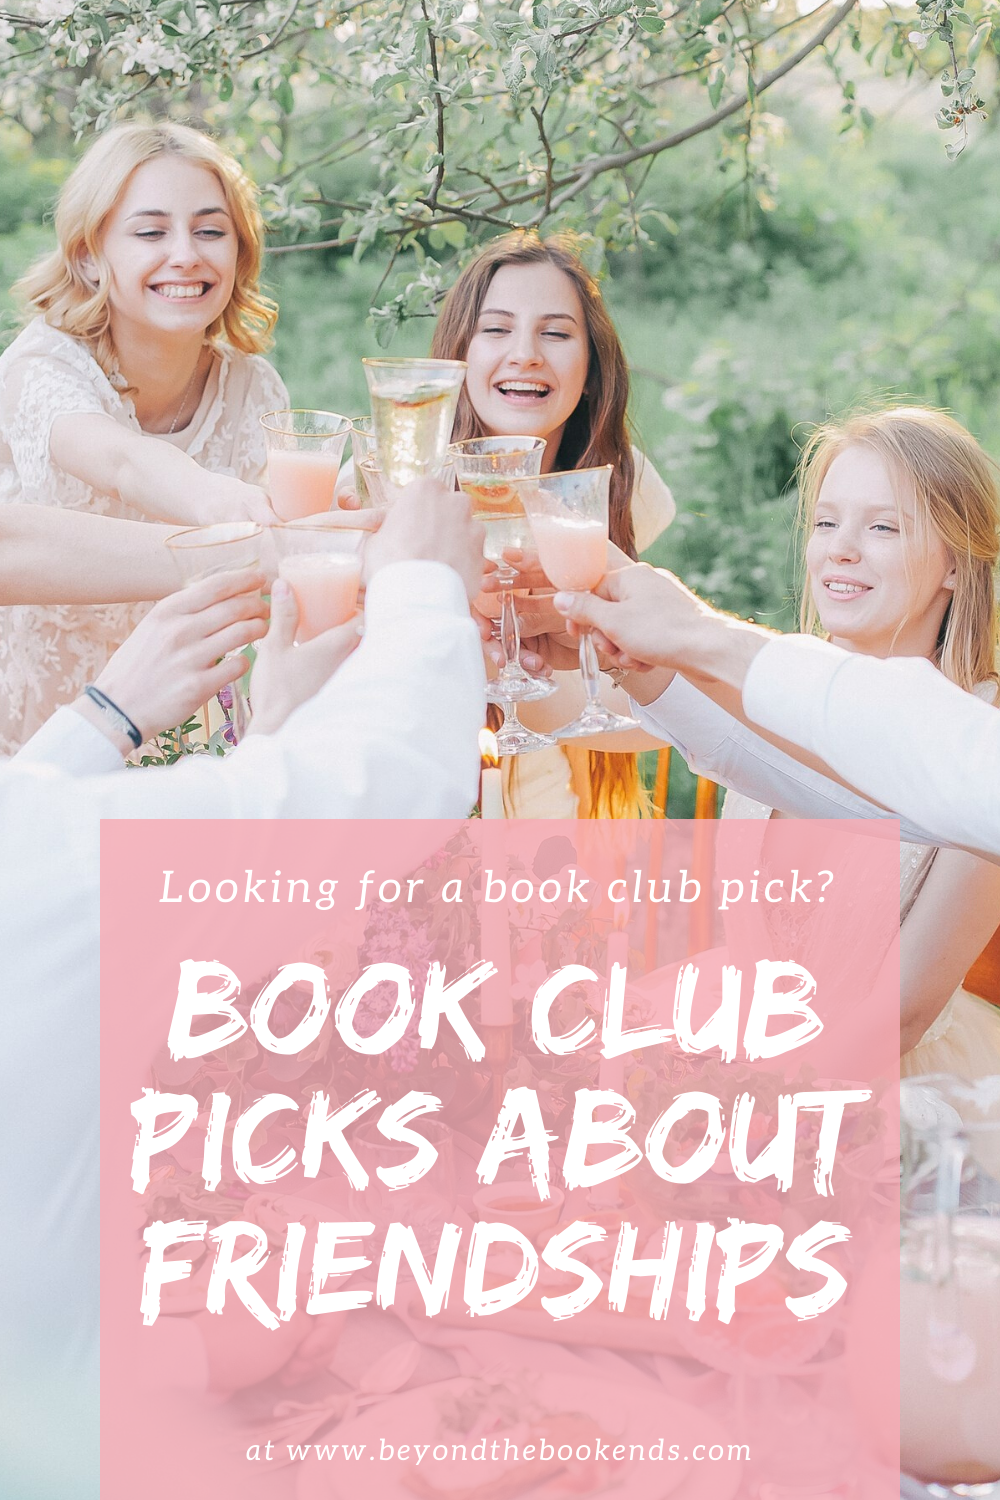 The perfect book club picks about friendship. New releases that will get your group of friends talking!